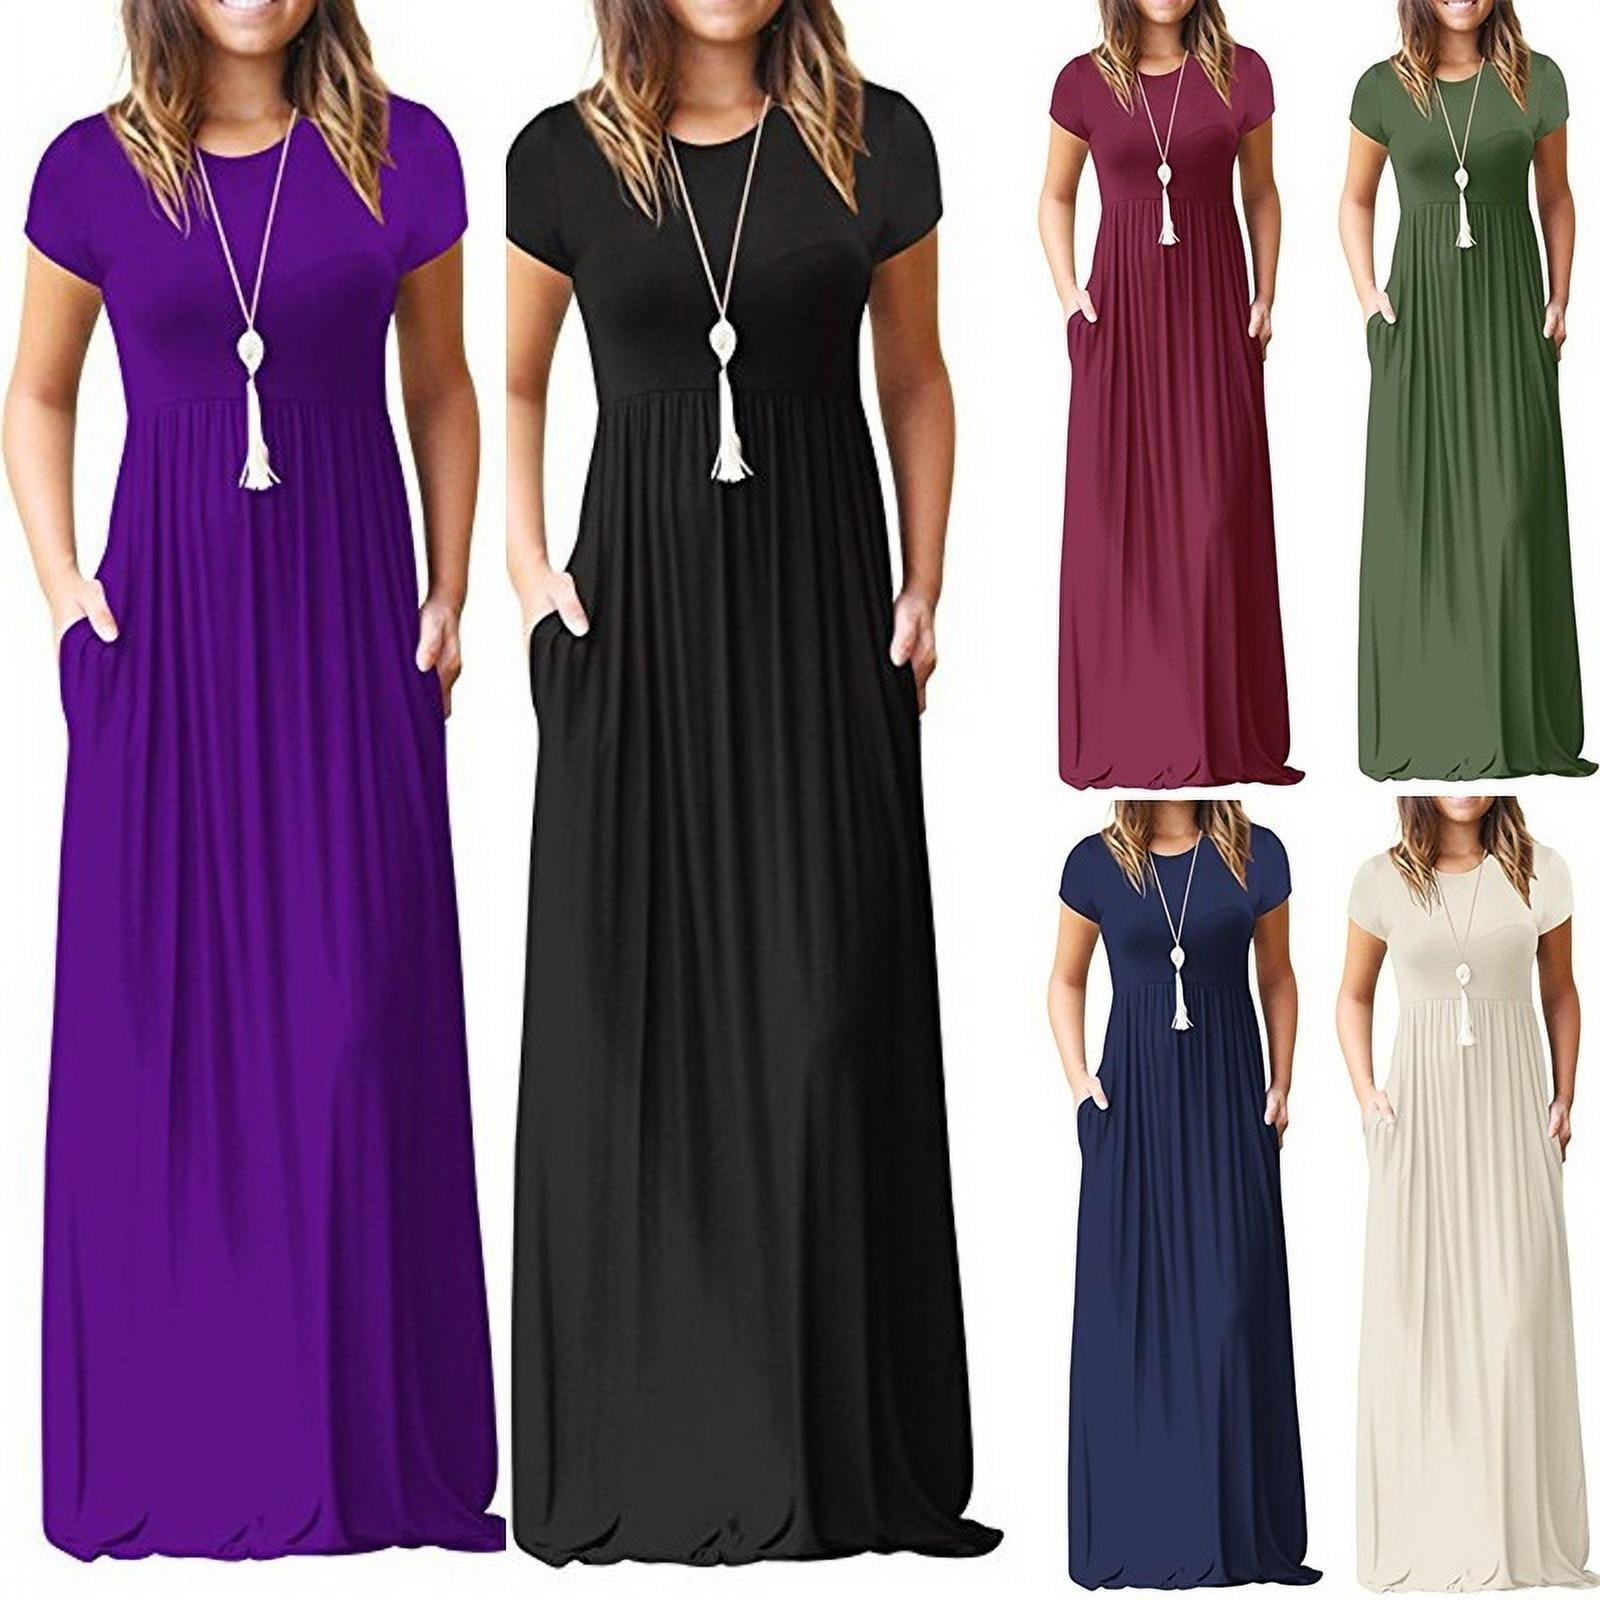 Women's Casual Long Dress Solid Color Short Sleeve Summer Outfit Maxi ...